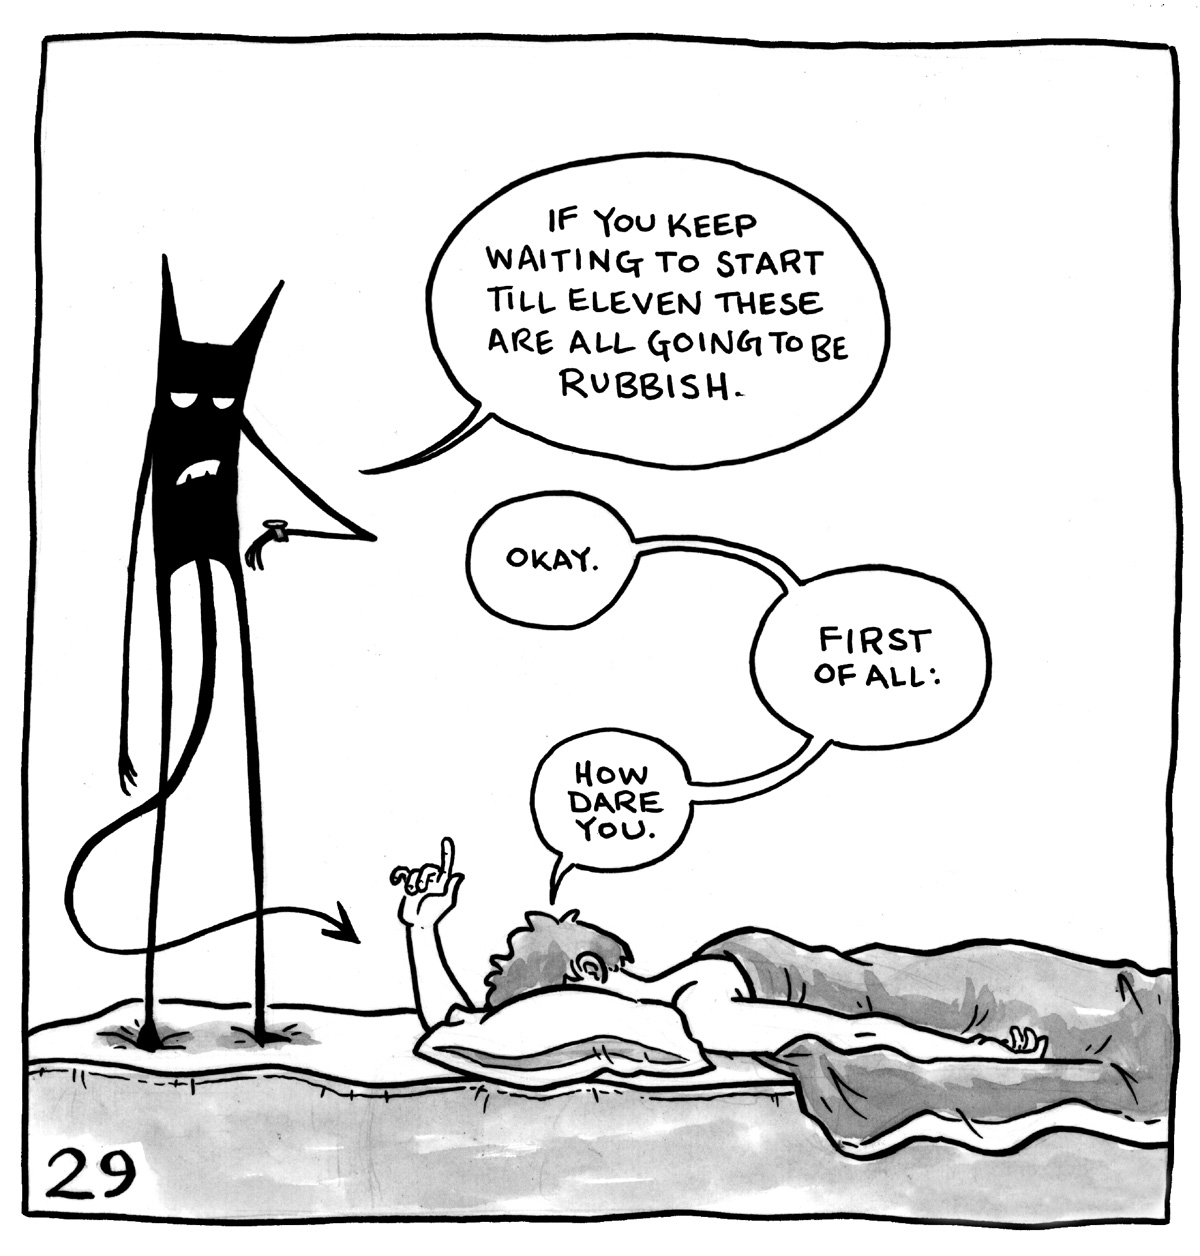 Black and white comic: The demon is looking at its watch while Lucy lies facedown in bed. The demon says, "If you keep waiting to start til eleven these are all going to be rubbish." Lucy says, "Okay. First of all: how dare you."